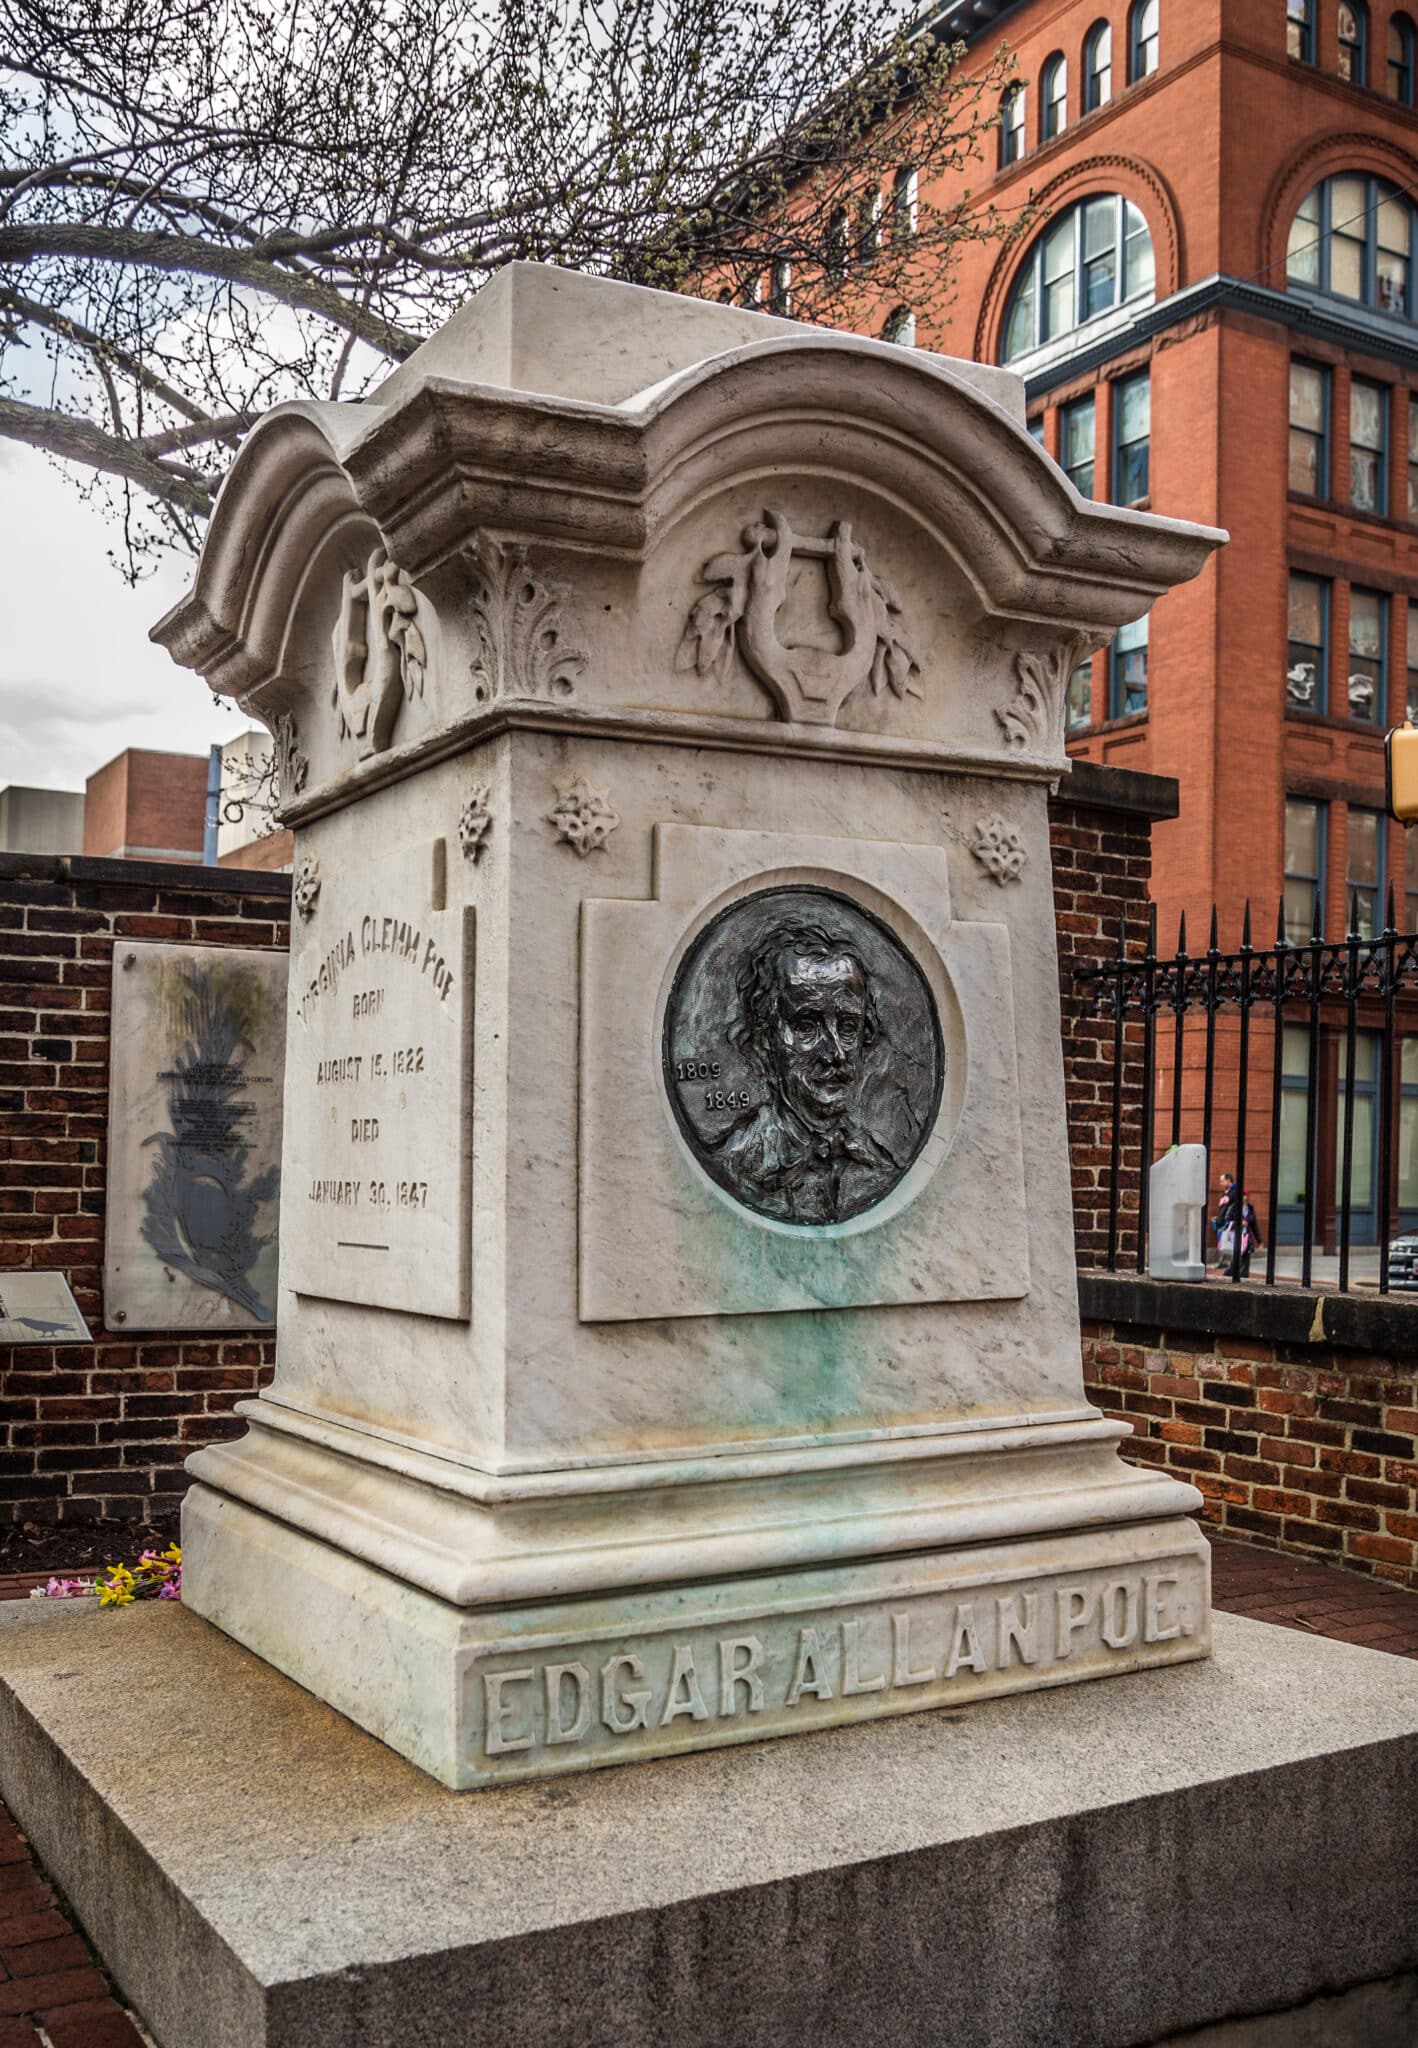 MARYLAND, USA - MARCH 16, 2016: Edgar Allan Poe's grave site and memorial on in Baltimore on March 16 2016.